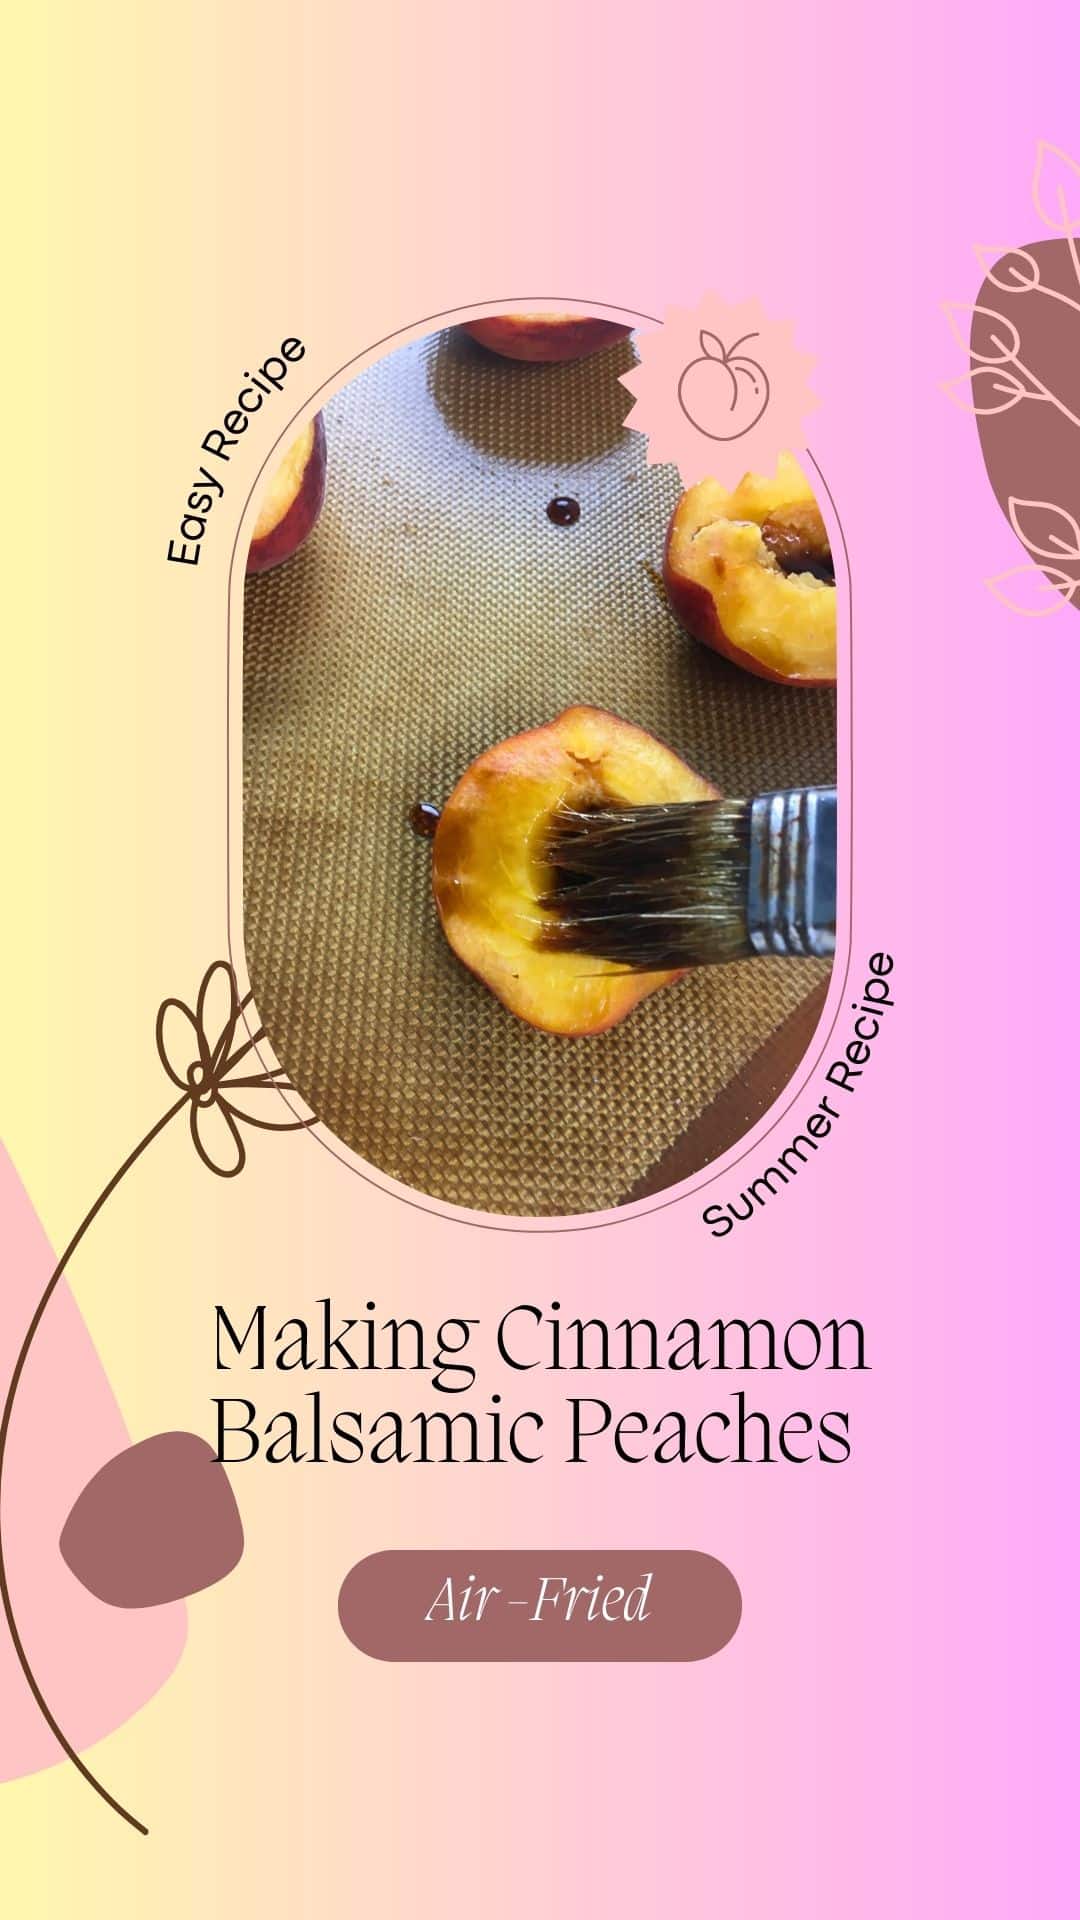 Drizzling balsamic vinegar over peaches Enhancing the sweetness with tangy balsamic vinegar